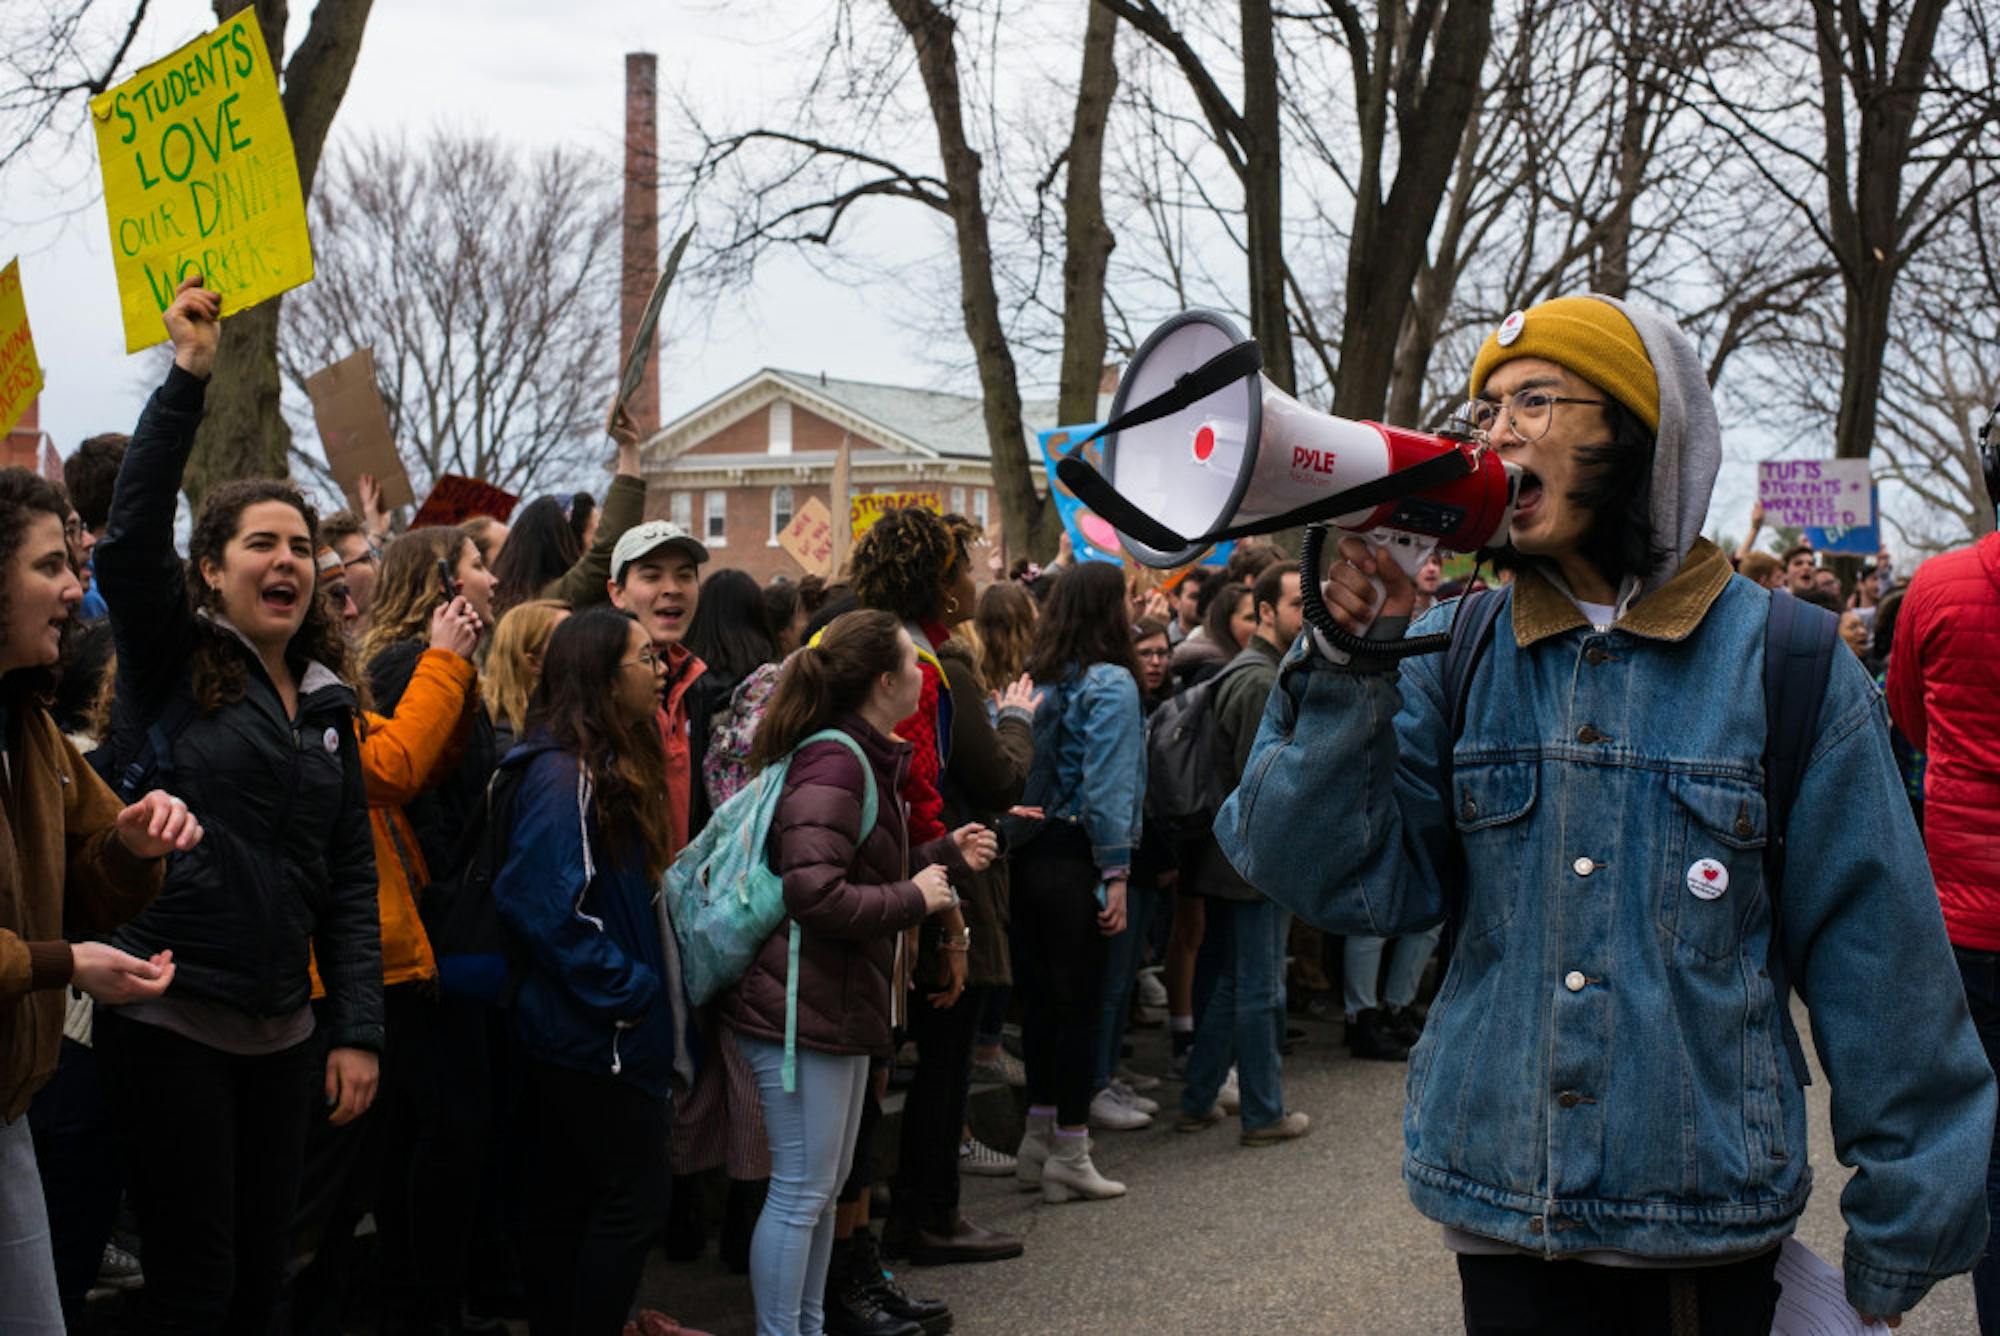 2018-04-03-Tufts-Dining-Union-Protest-013-1